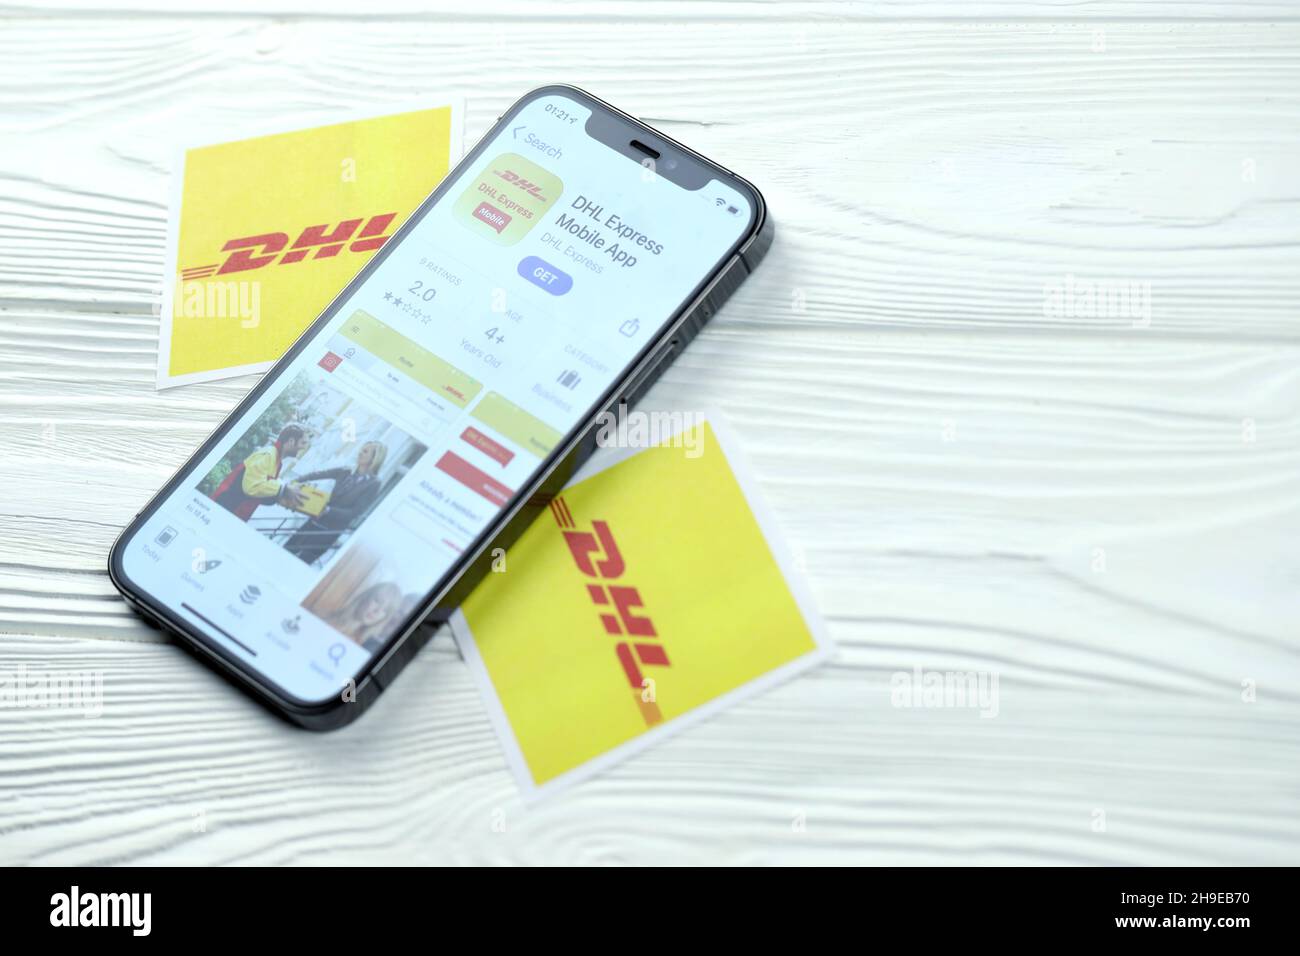 Dhl delivery app High Resolution Stock Photography and Images - Alamy